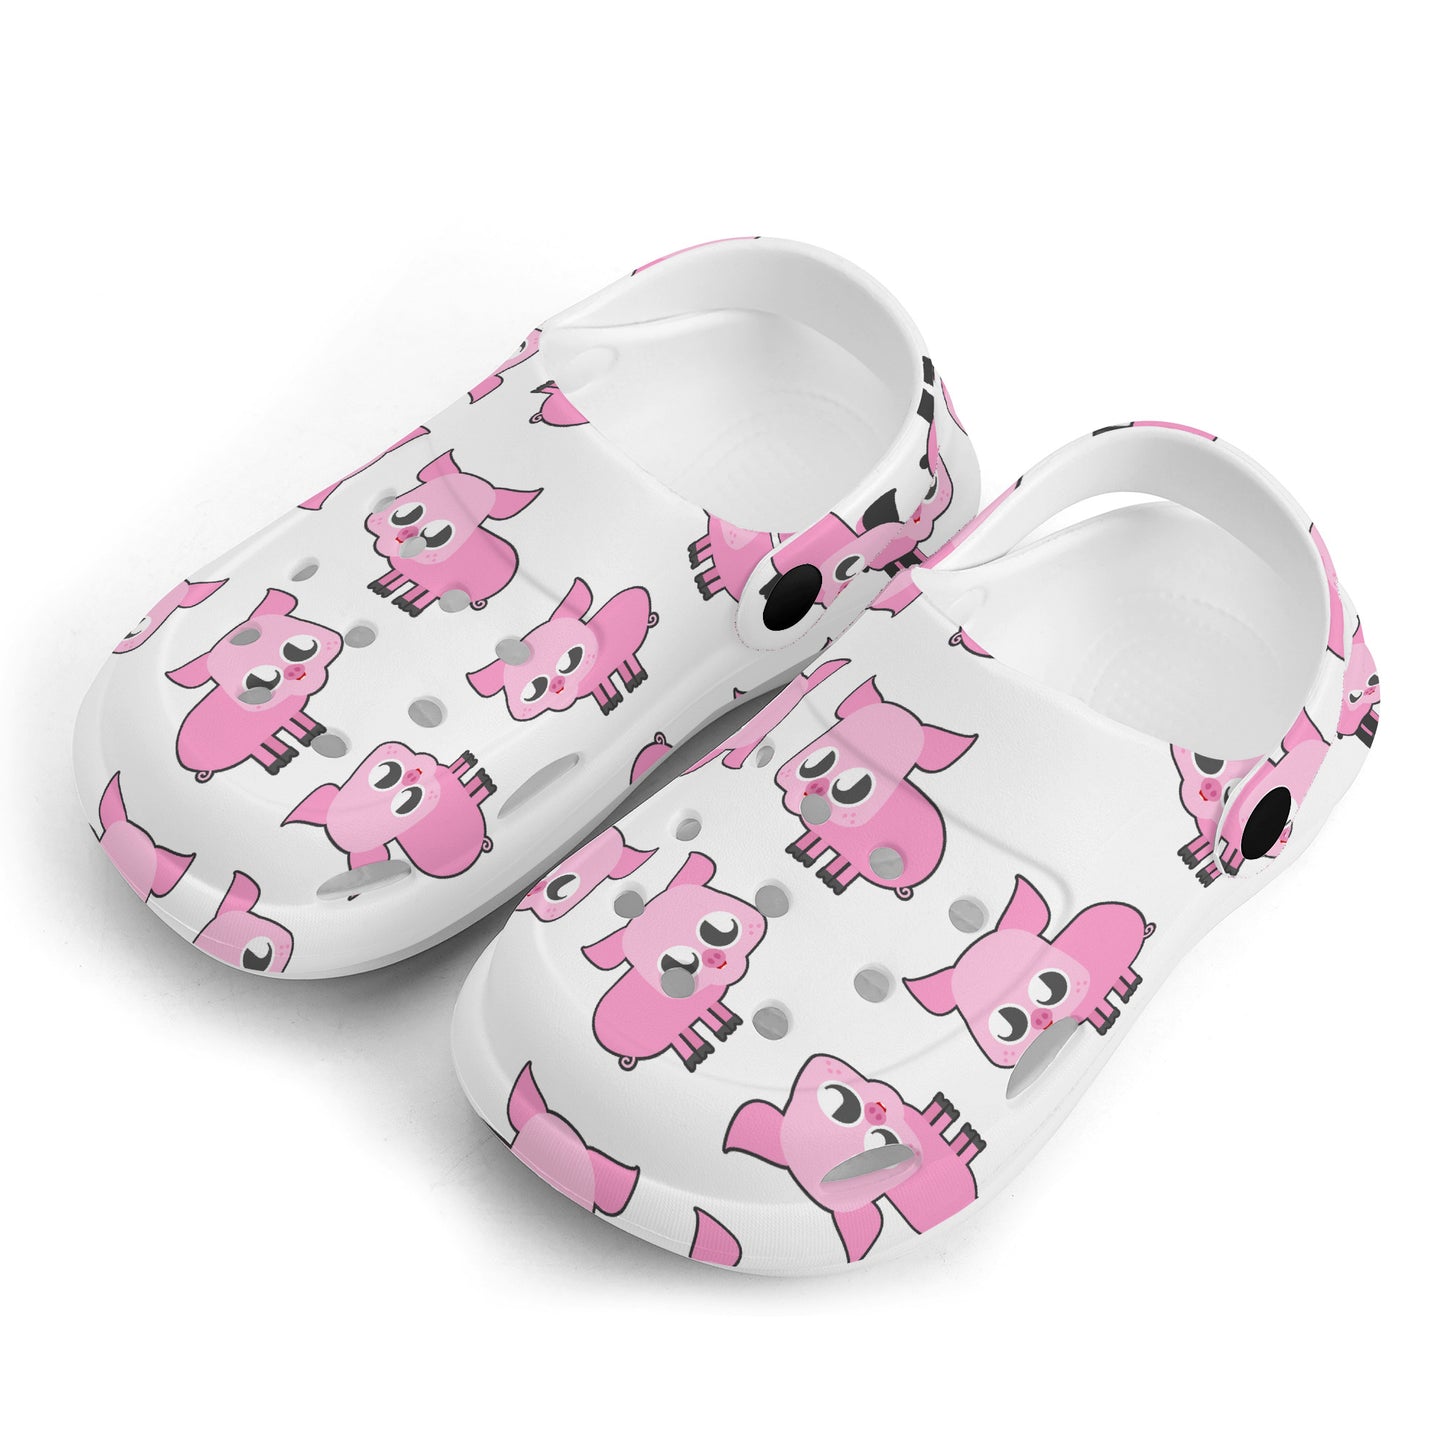 Kid's Casual Clogs